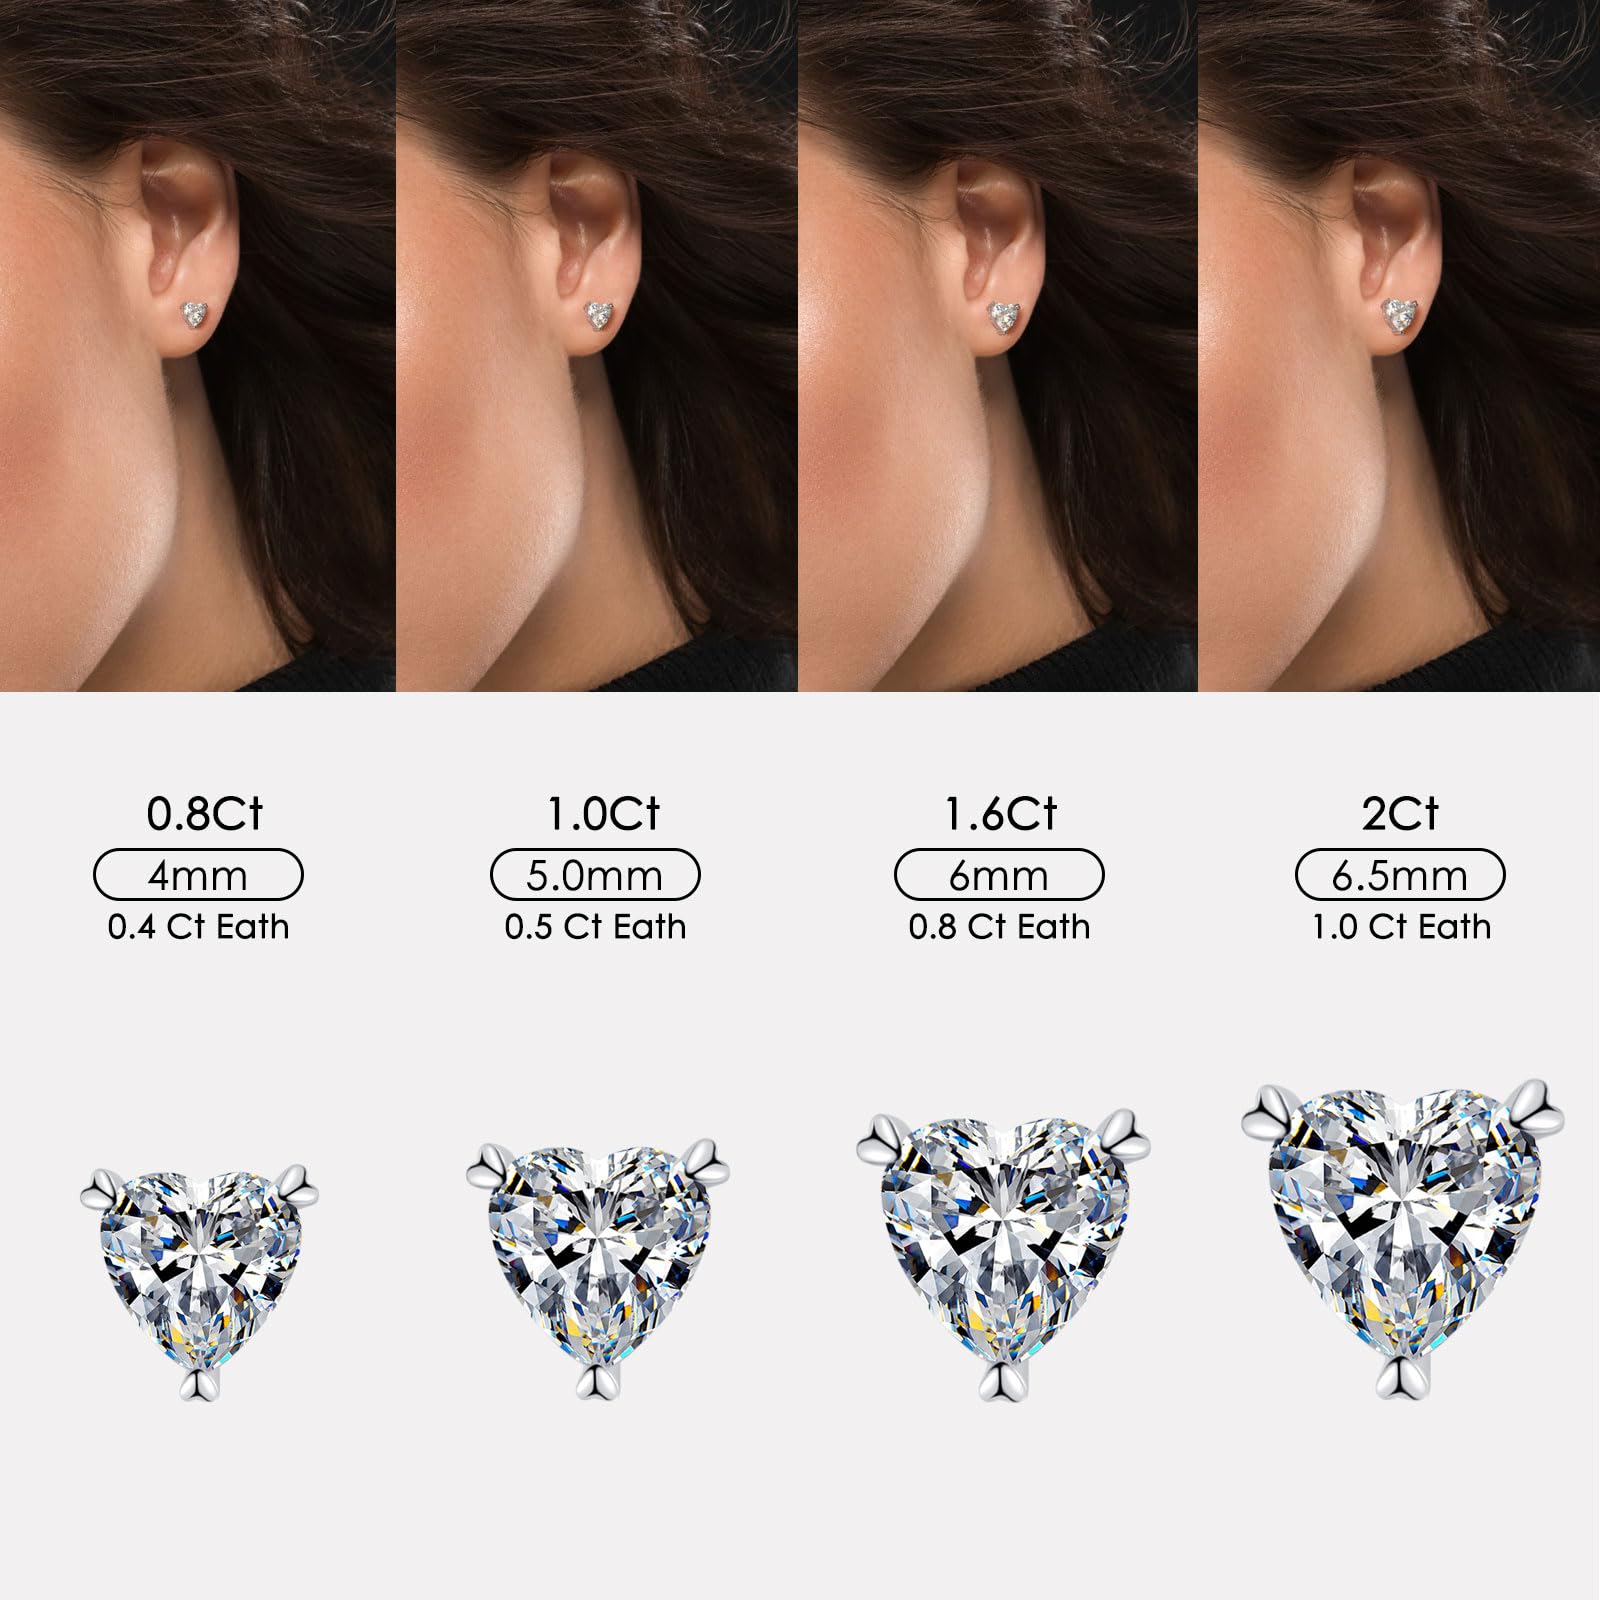 Diamond Stud Earrings for Women Men Gifts for Wife Soulmate Mom Girlfriend Moissanite Stud Earrings 1.0Ct-2Ct with Screw Ear Backs, Annivers ary Jewelry Present for Wife, Birthday Valentines Gifts